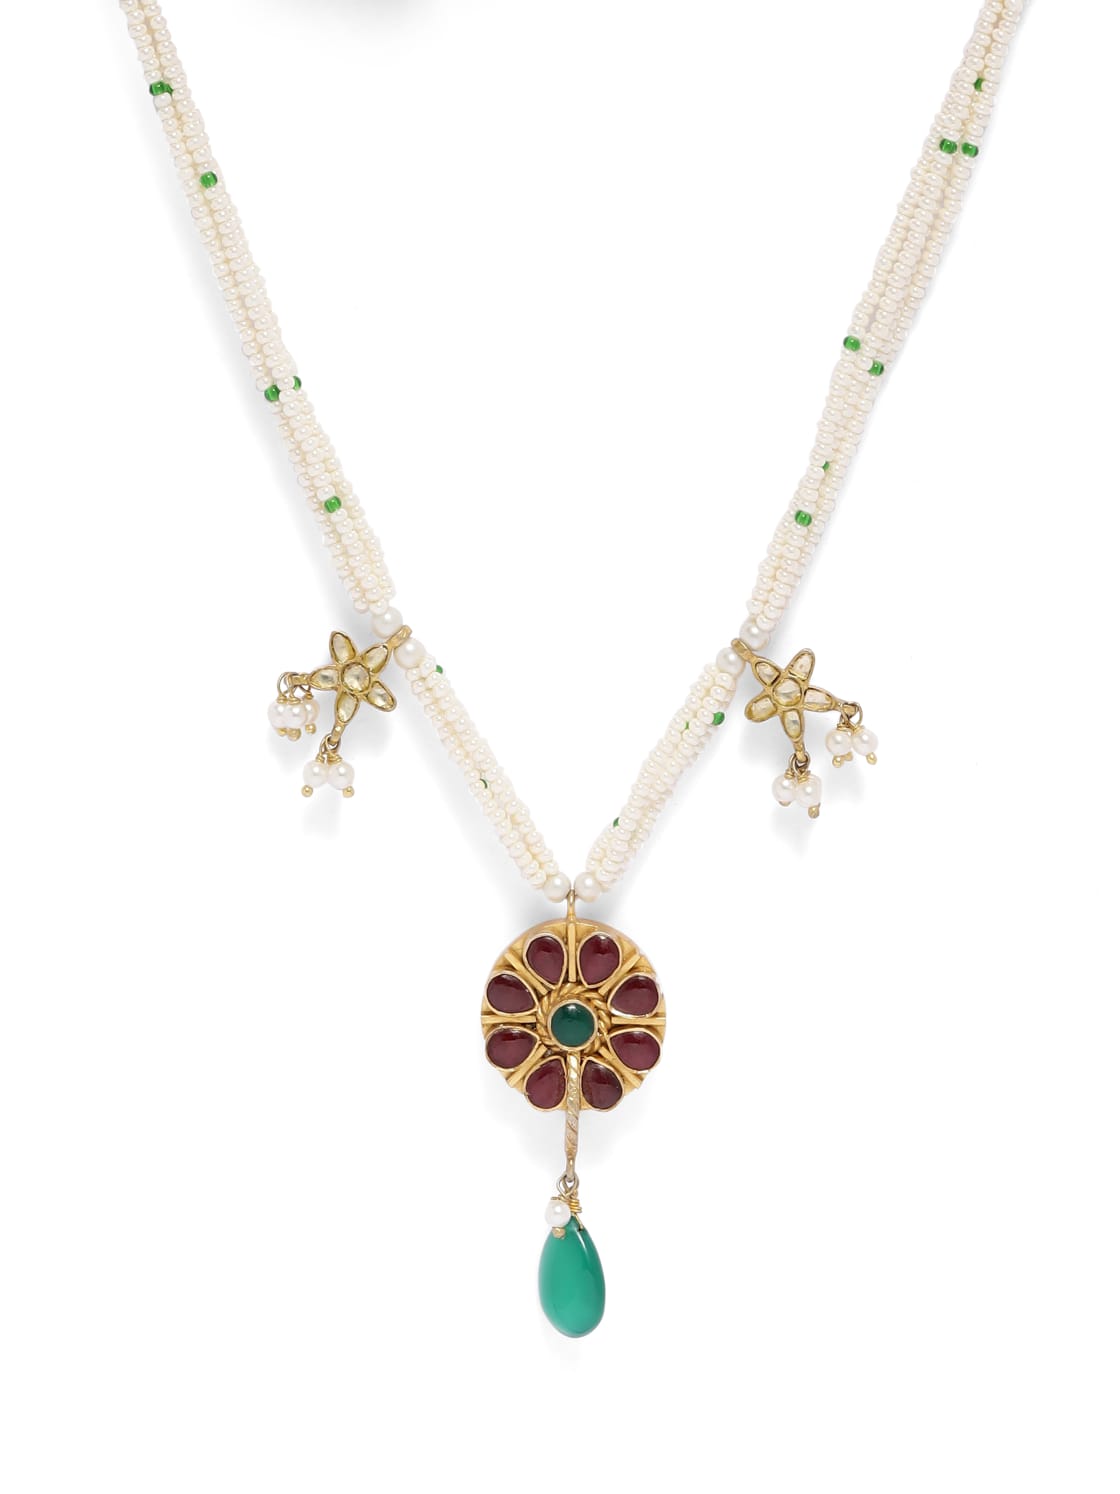 92.5 sterling Silver, Gold plated jadau Polki with Pearl string with green Onyx bead necklace.